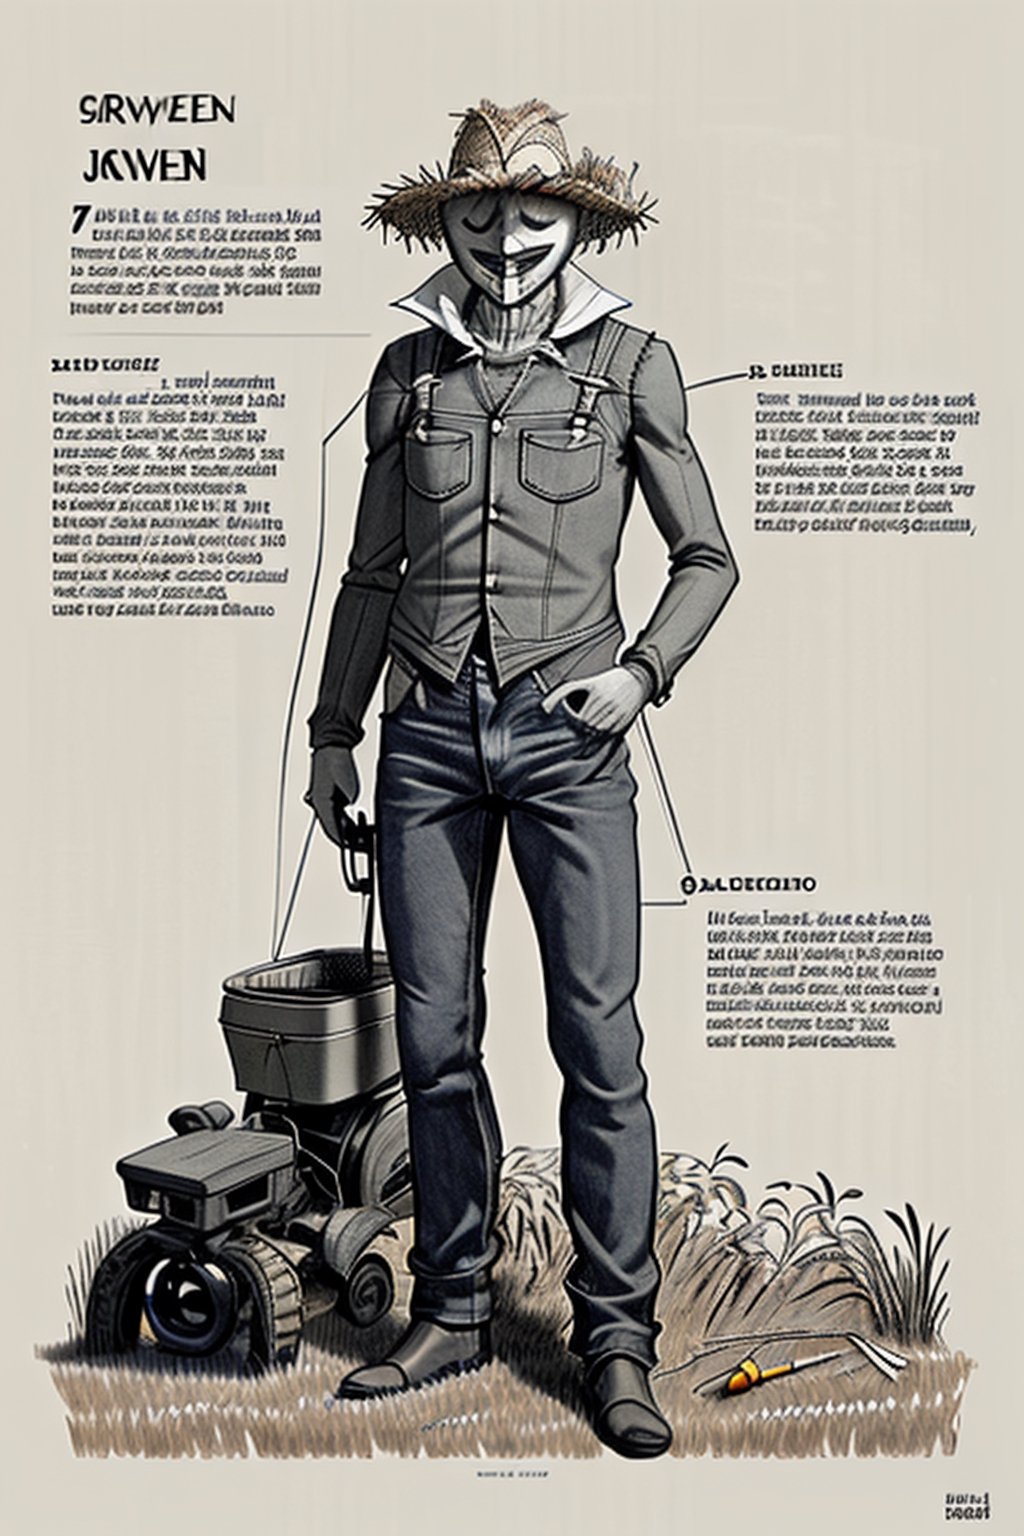 draft, outline, monochrome,  reference sheet, how to build a scarecrow with old jeans, old clothing, tractor and cornfield. Straw coming out of scarecrow